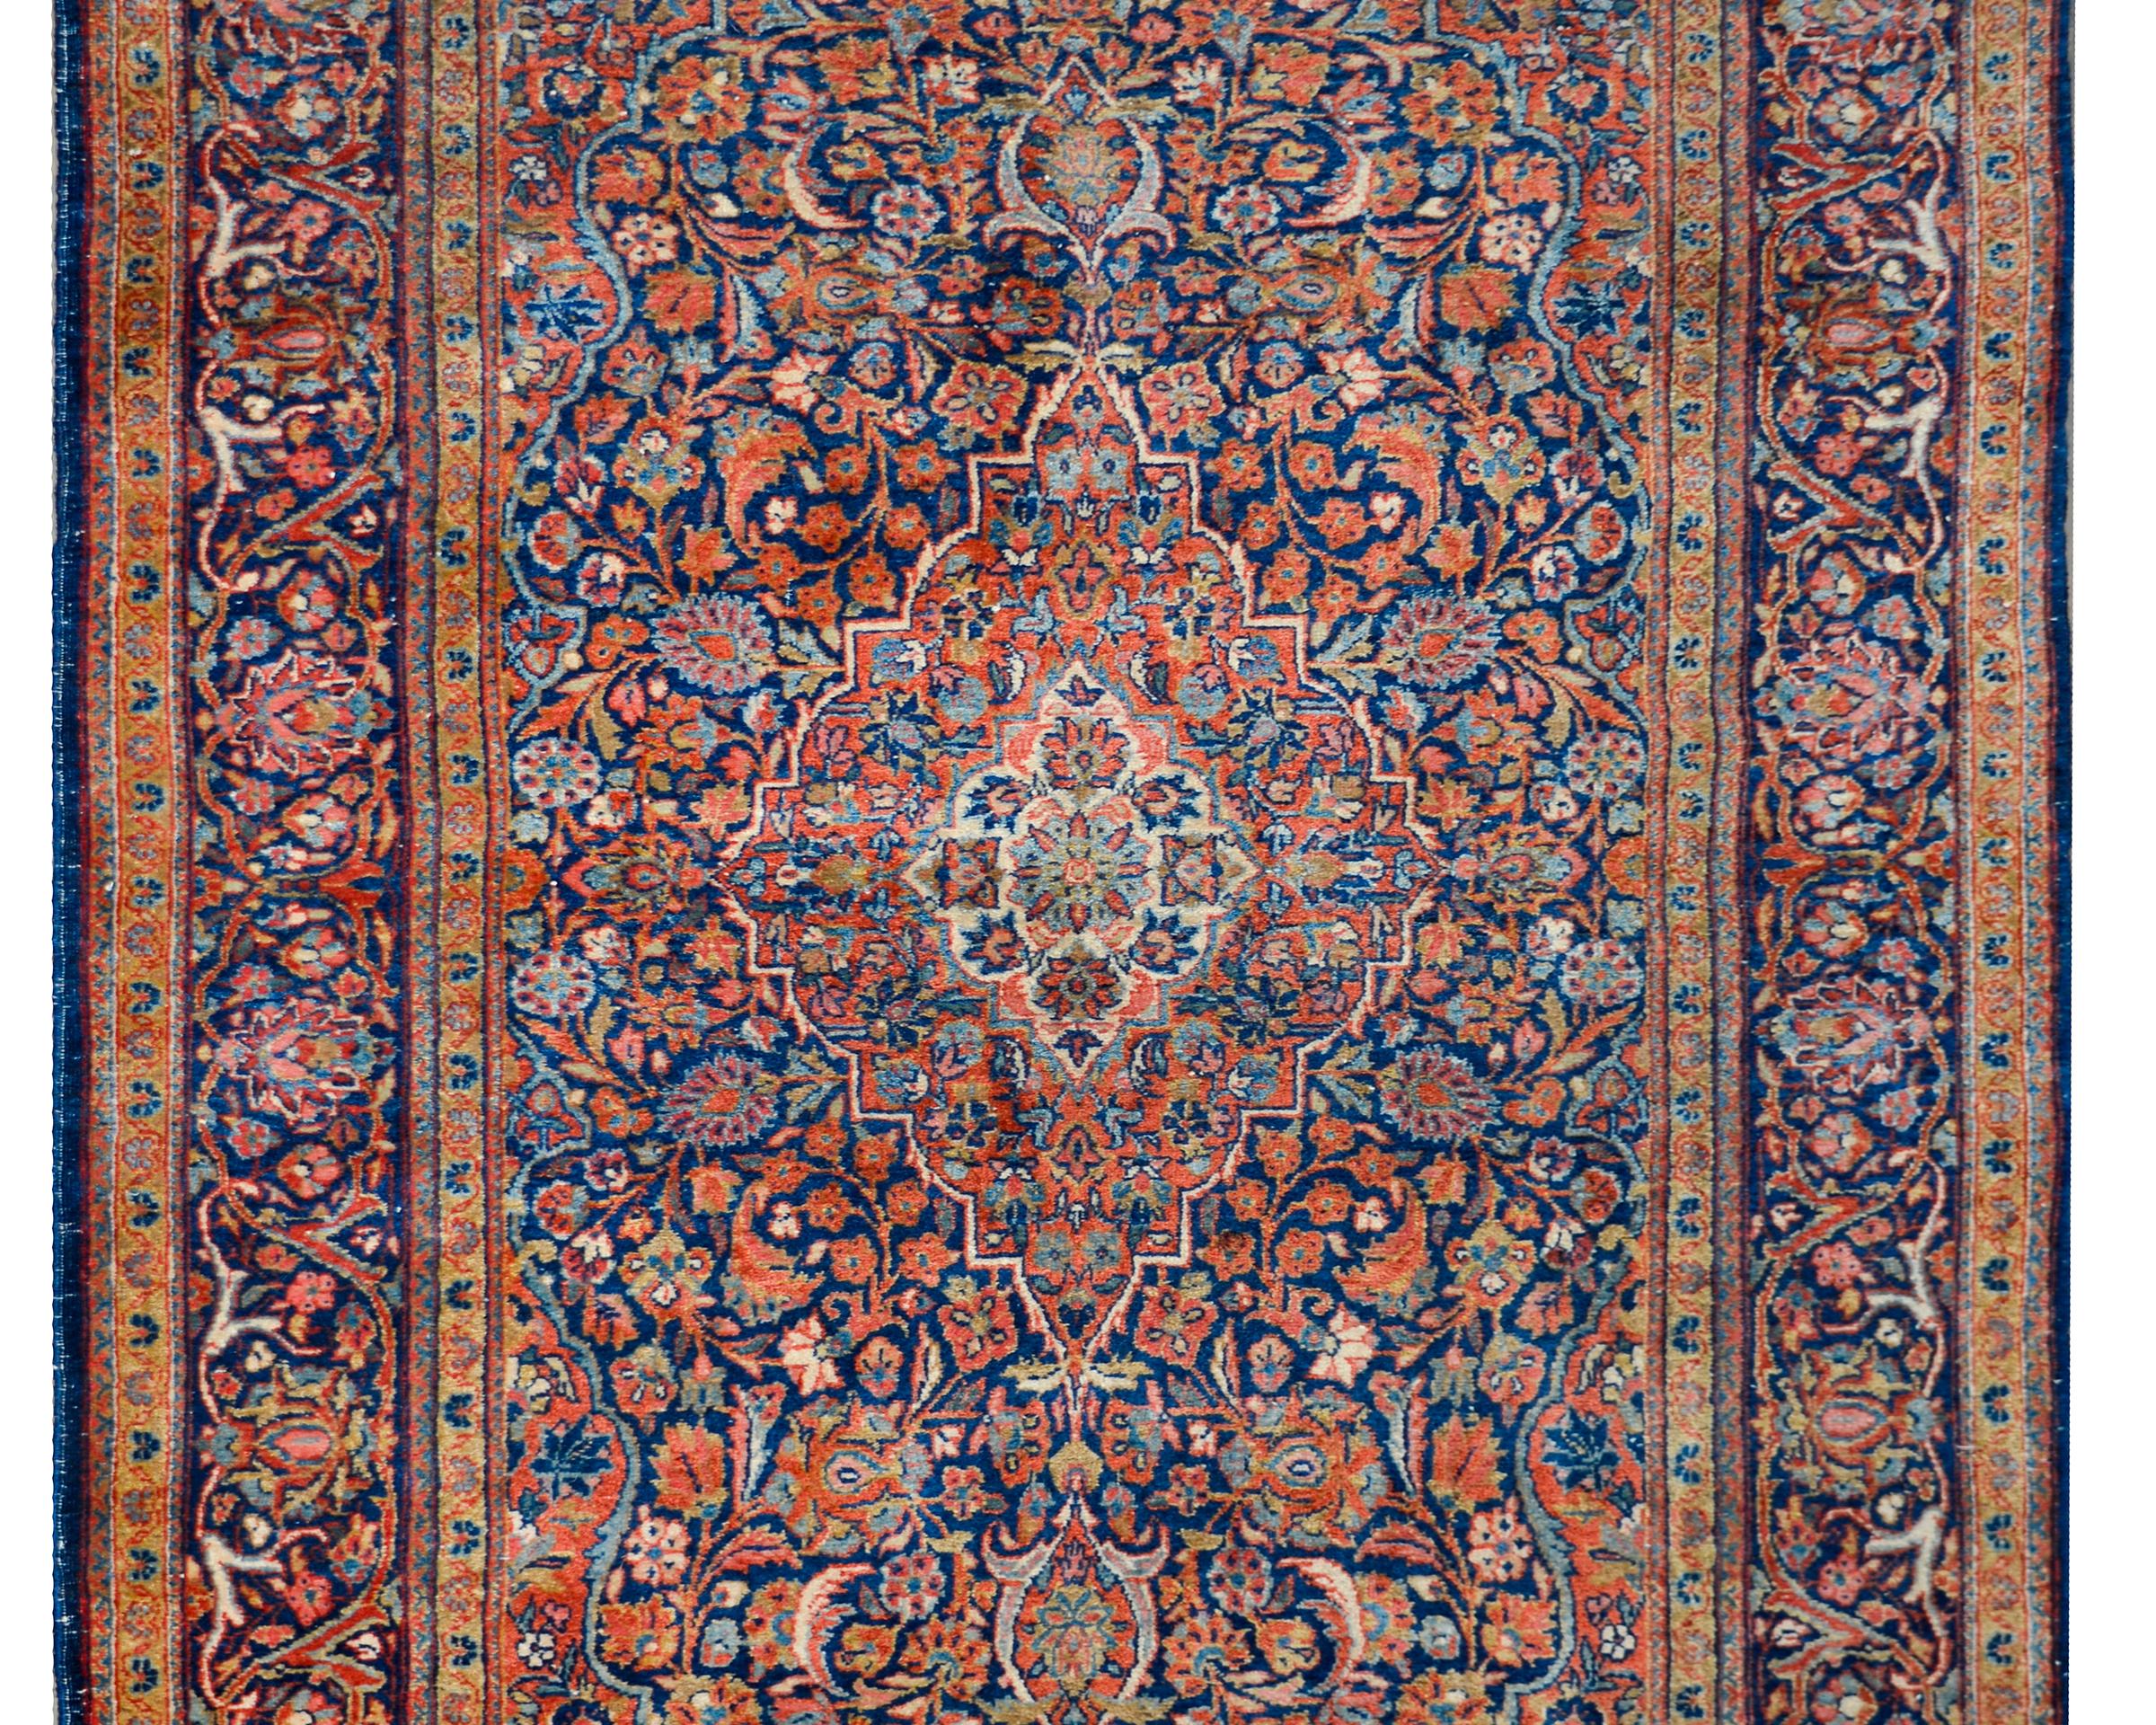 A stunning early 20th century Persian Kashan rug with a traditional central floral medallion living amidst a field of scrolling vines, leaves, and flowers, all woven in traditional Kashan colors of light and dark indigo, crimson, gold, and cream,